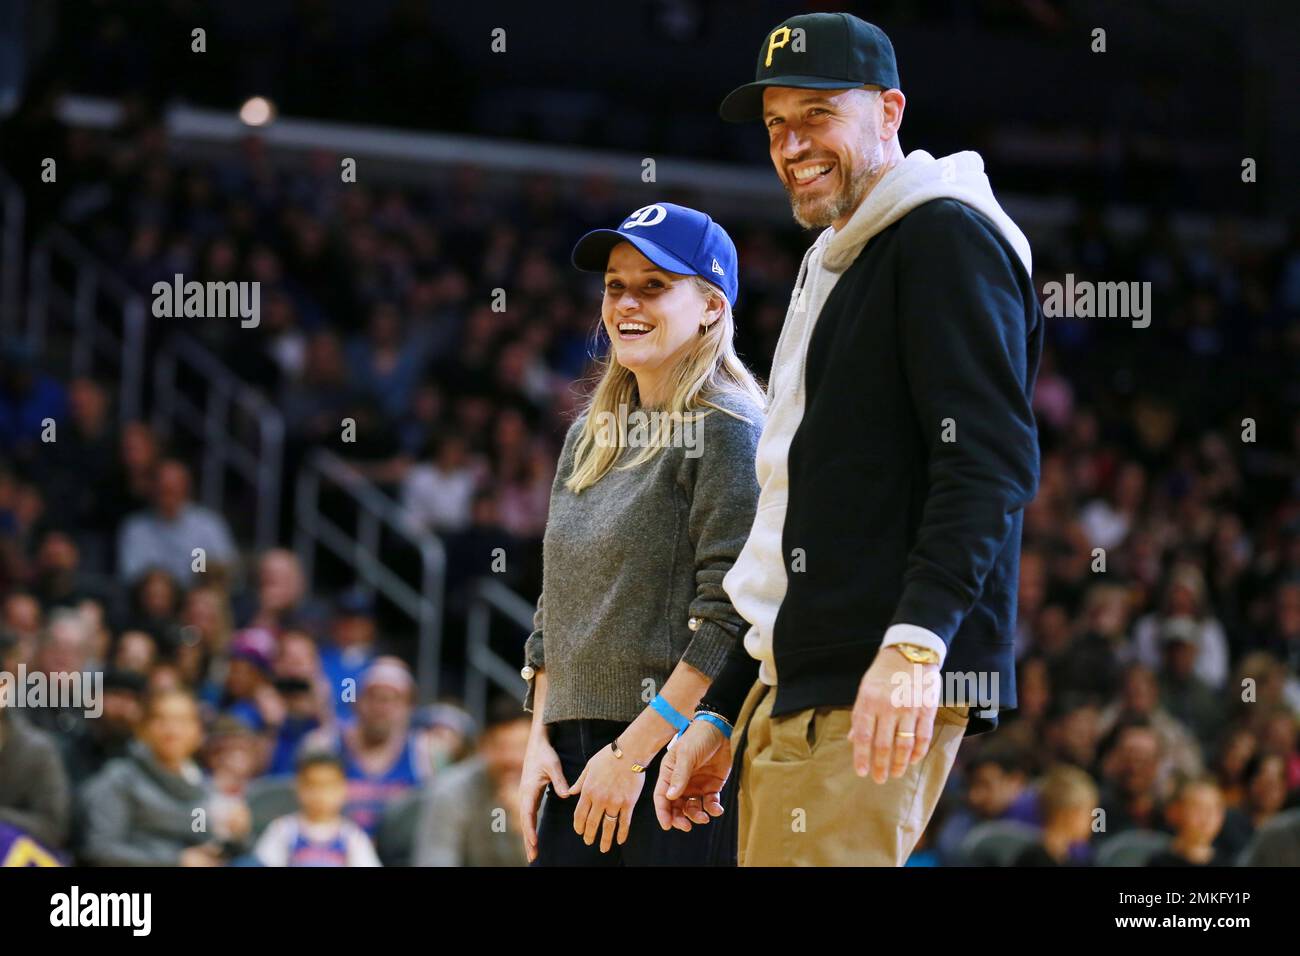 Reese Witherspoon and her husband Jim Toth attend The Harlem Globetrotters game at Staples Center on Feb. 17, 2019, in Los Angeles. (Photo by John Salangsang/Invision for The Harlem Globetrotters/AP) Stock Photo